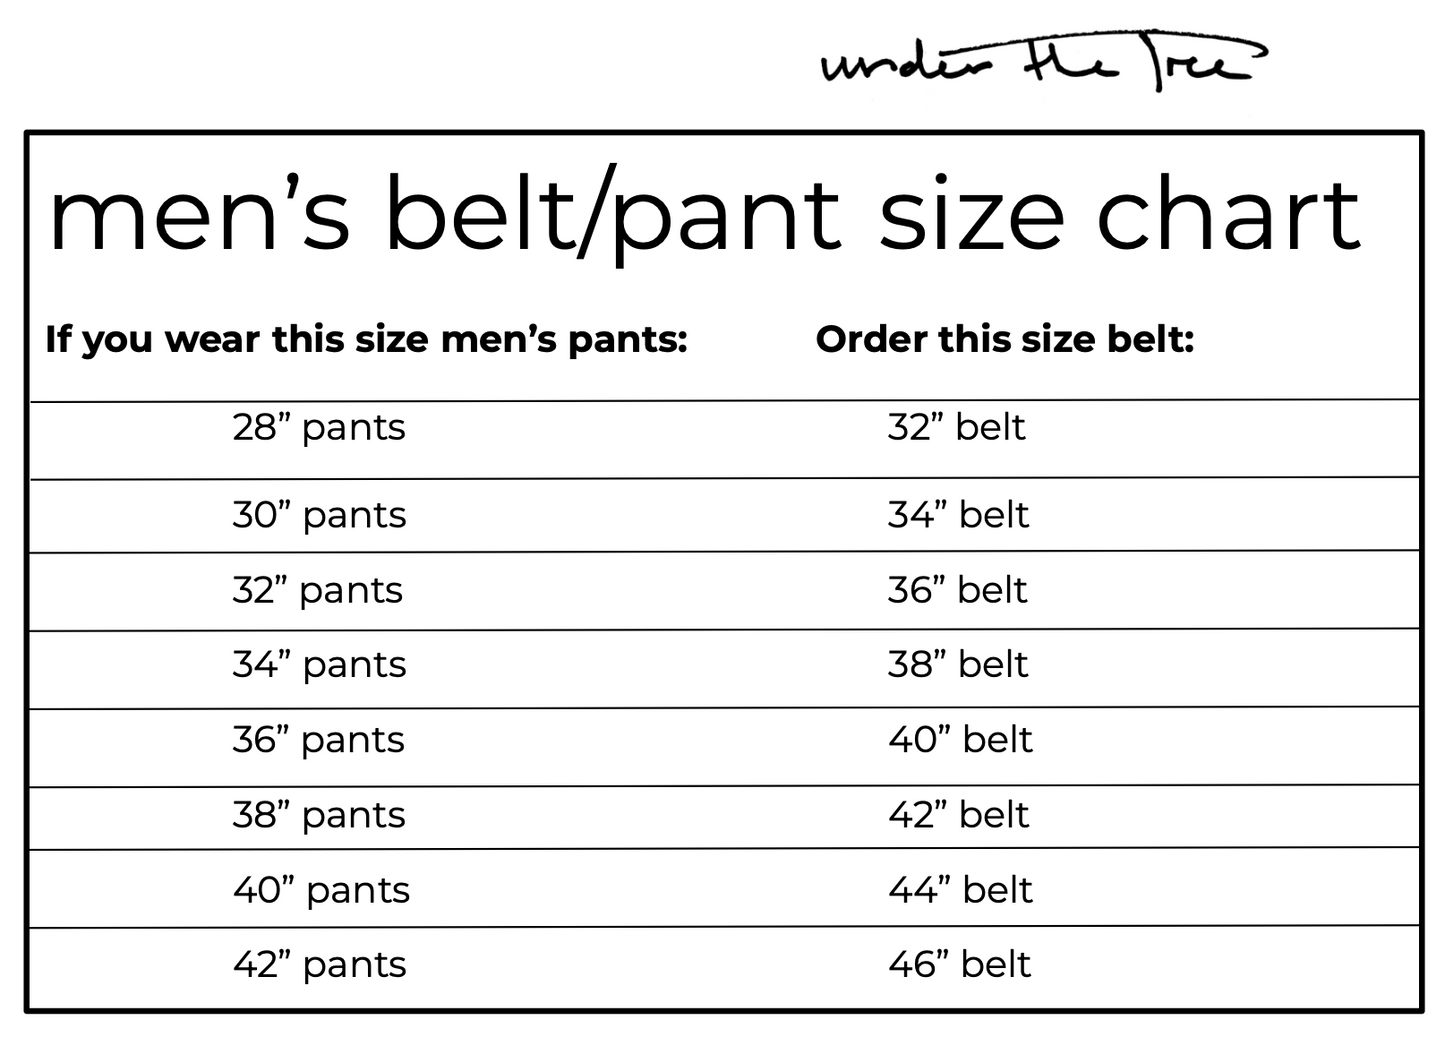 I wore men's pant size 36-38 and I'm short, what women's size pants would I  be able to wear? - Quora